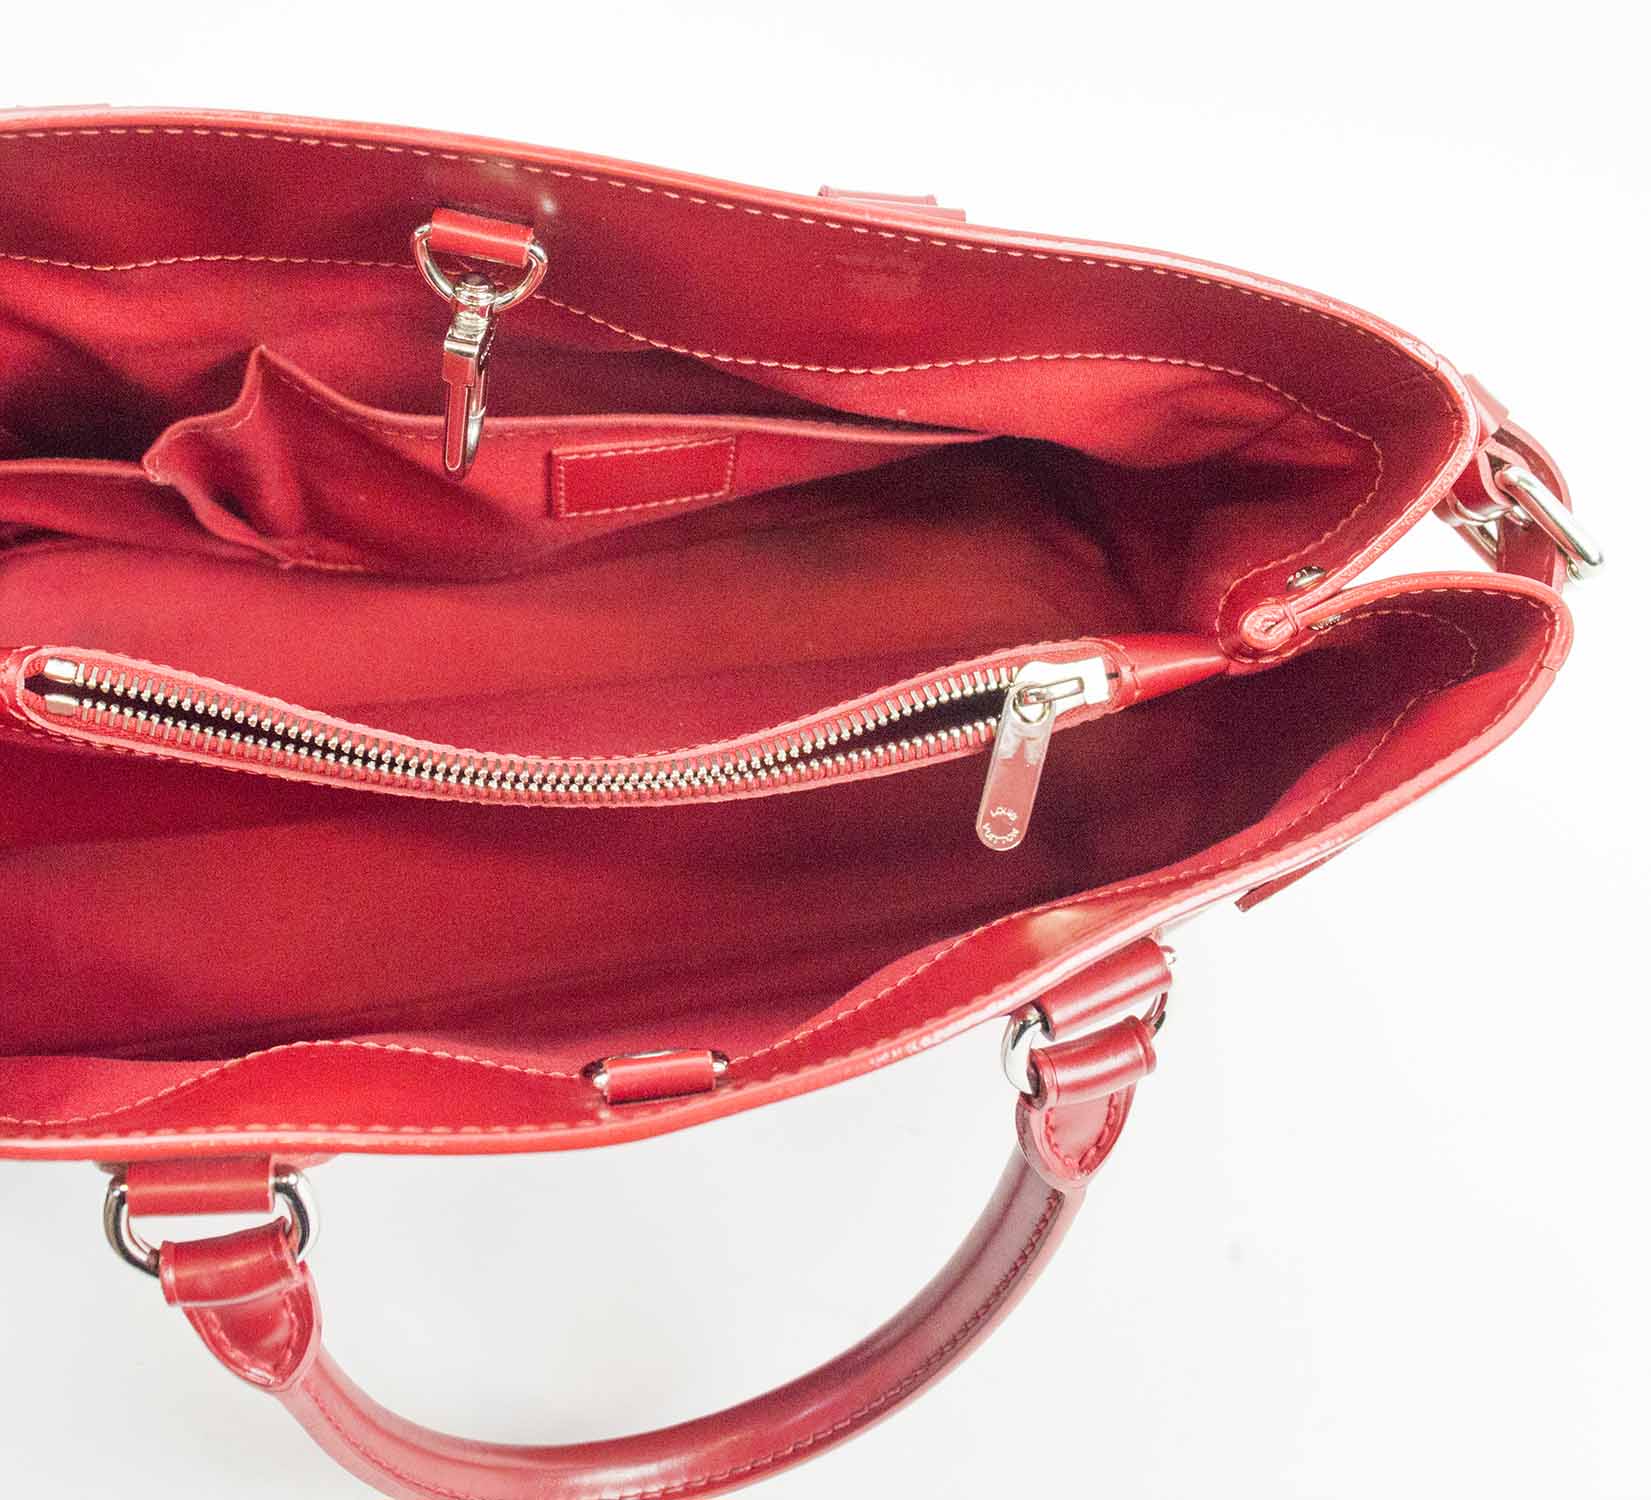 Sold at Auction: LOUIS VUITTON - RED EPI LEATHER PASSY